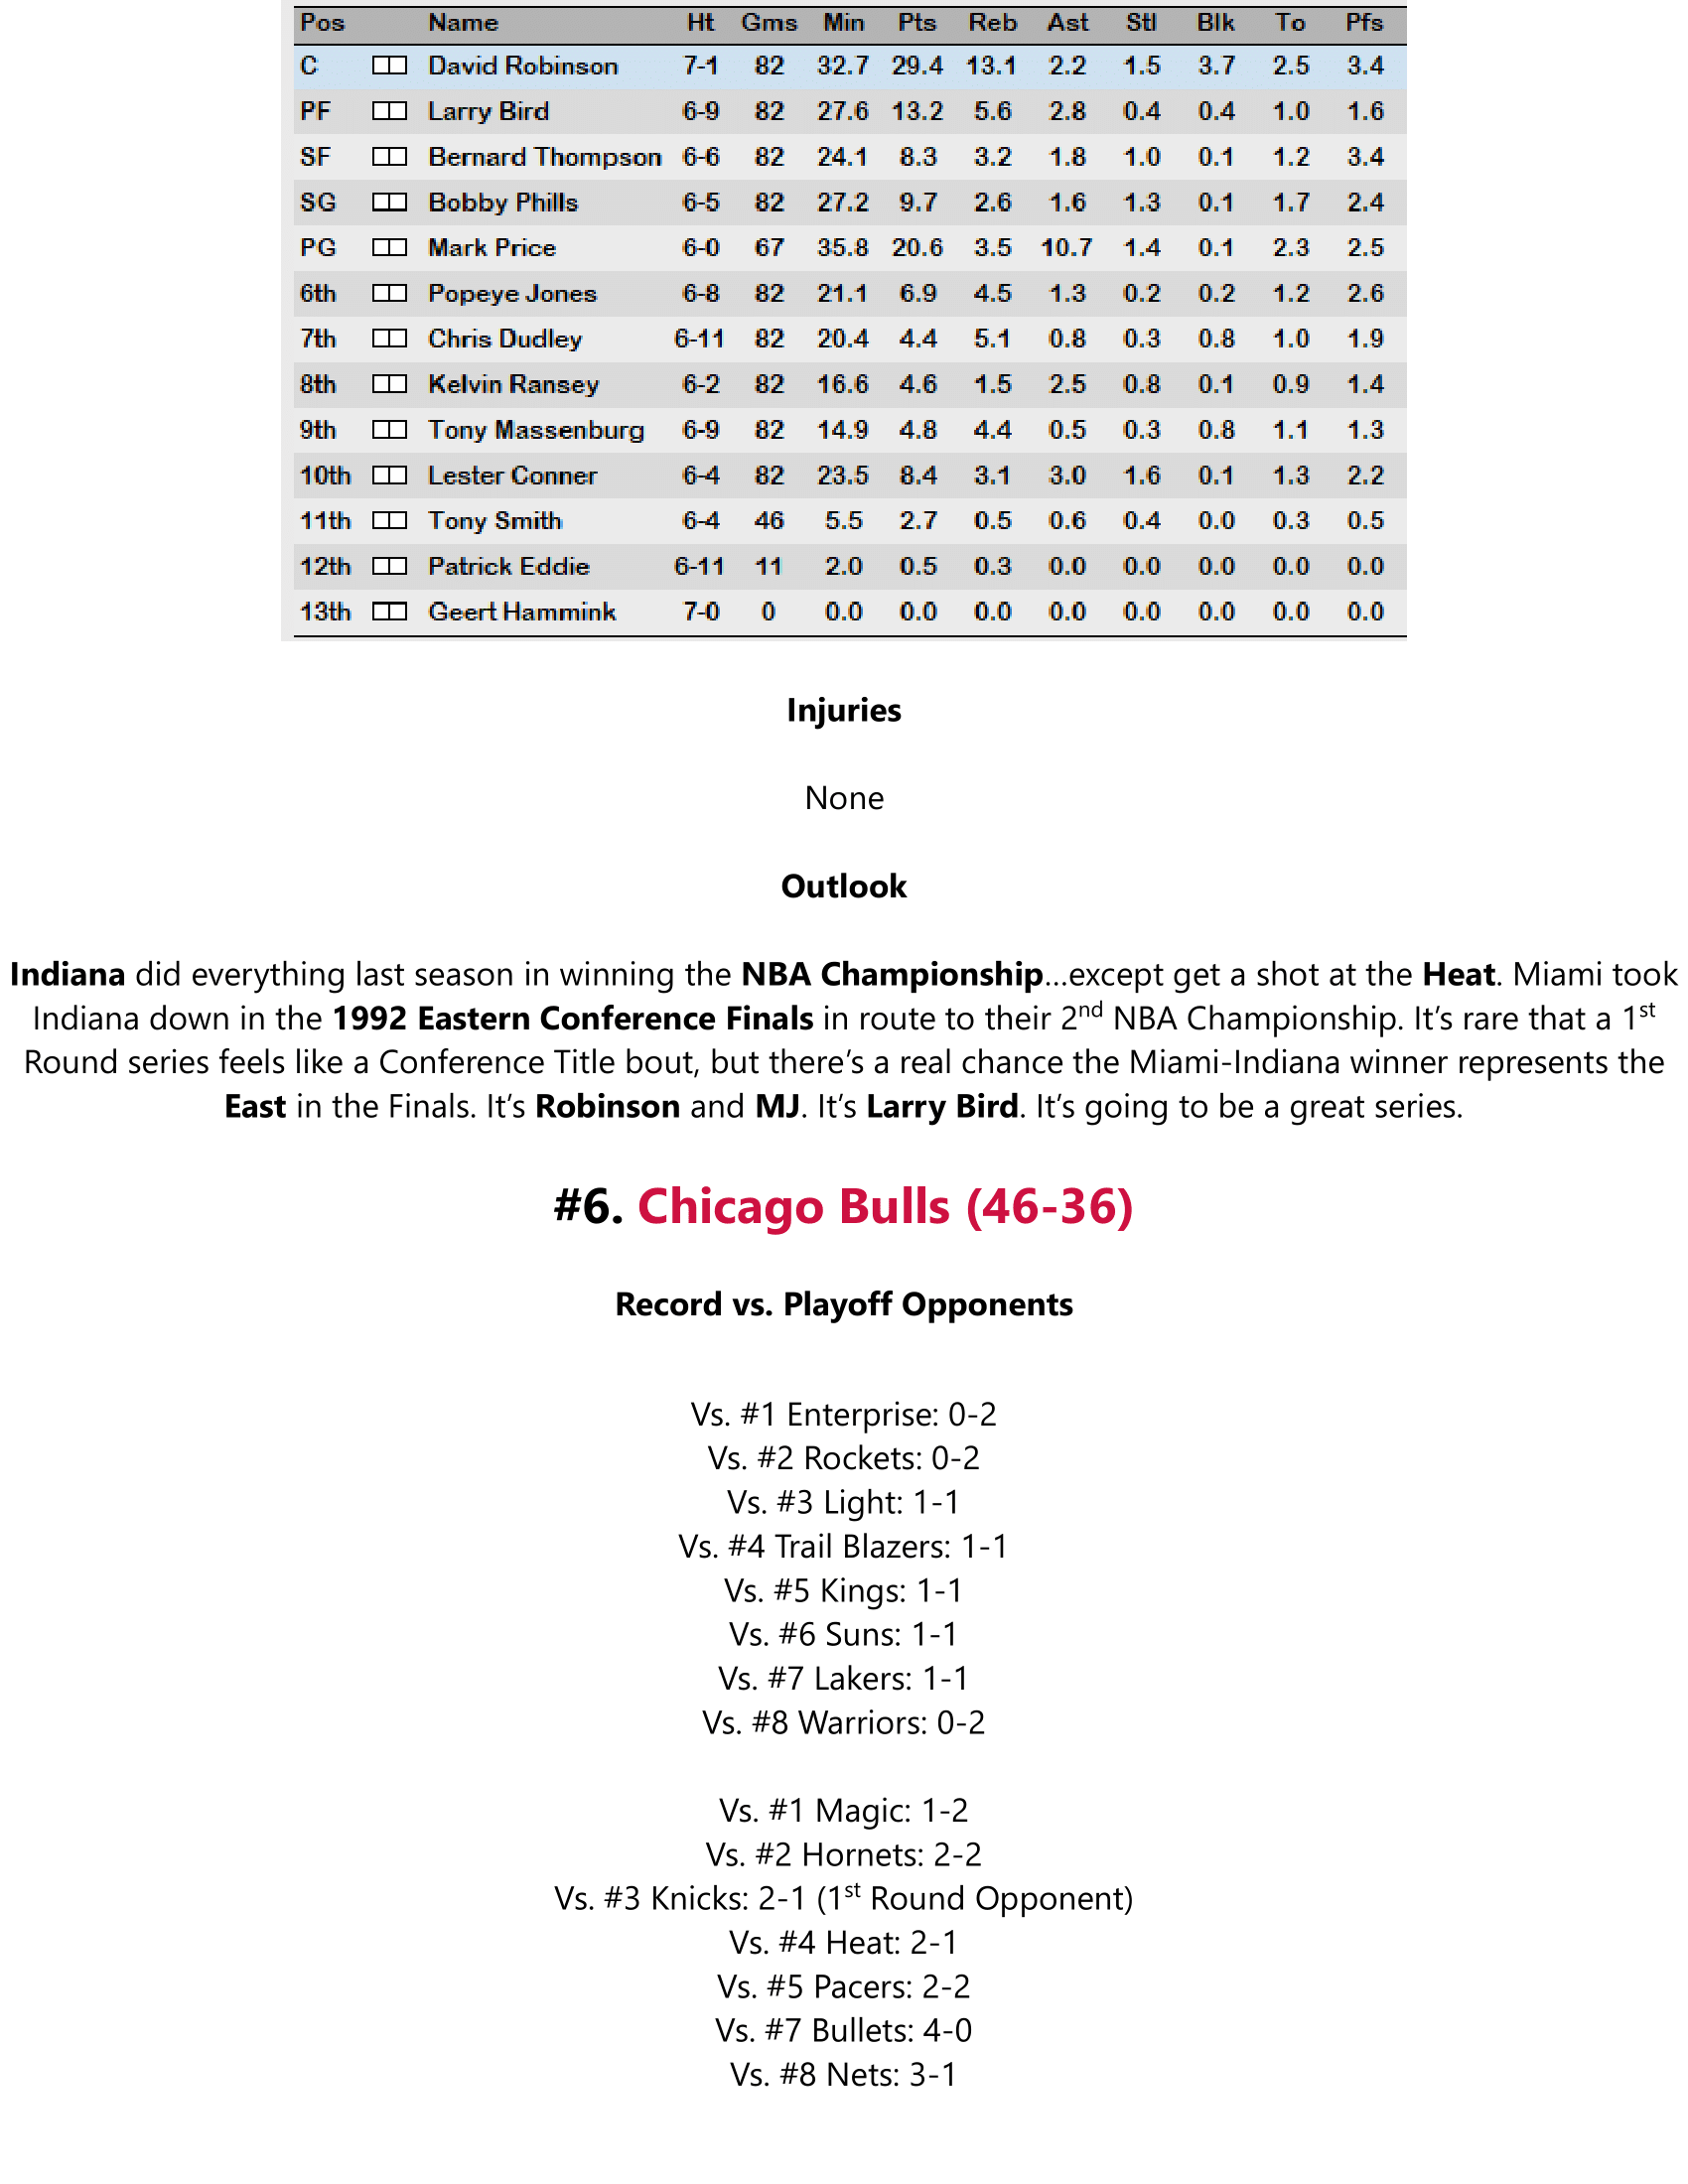 93-94-Part-4-Playoff-Preview-21.png